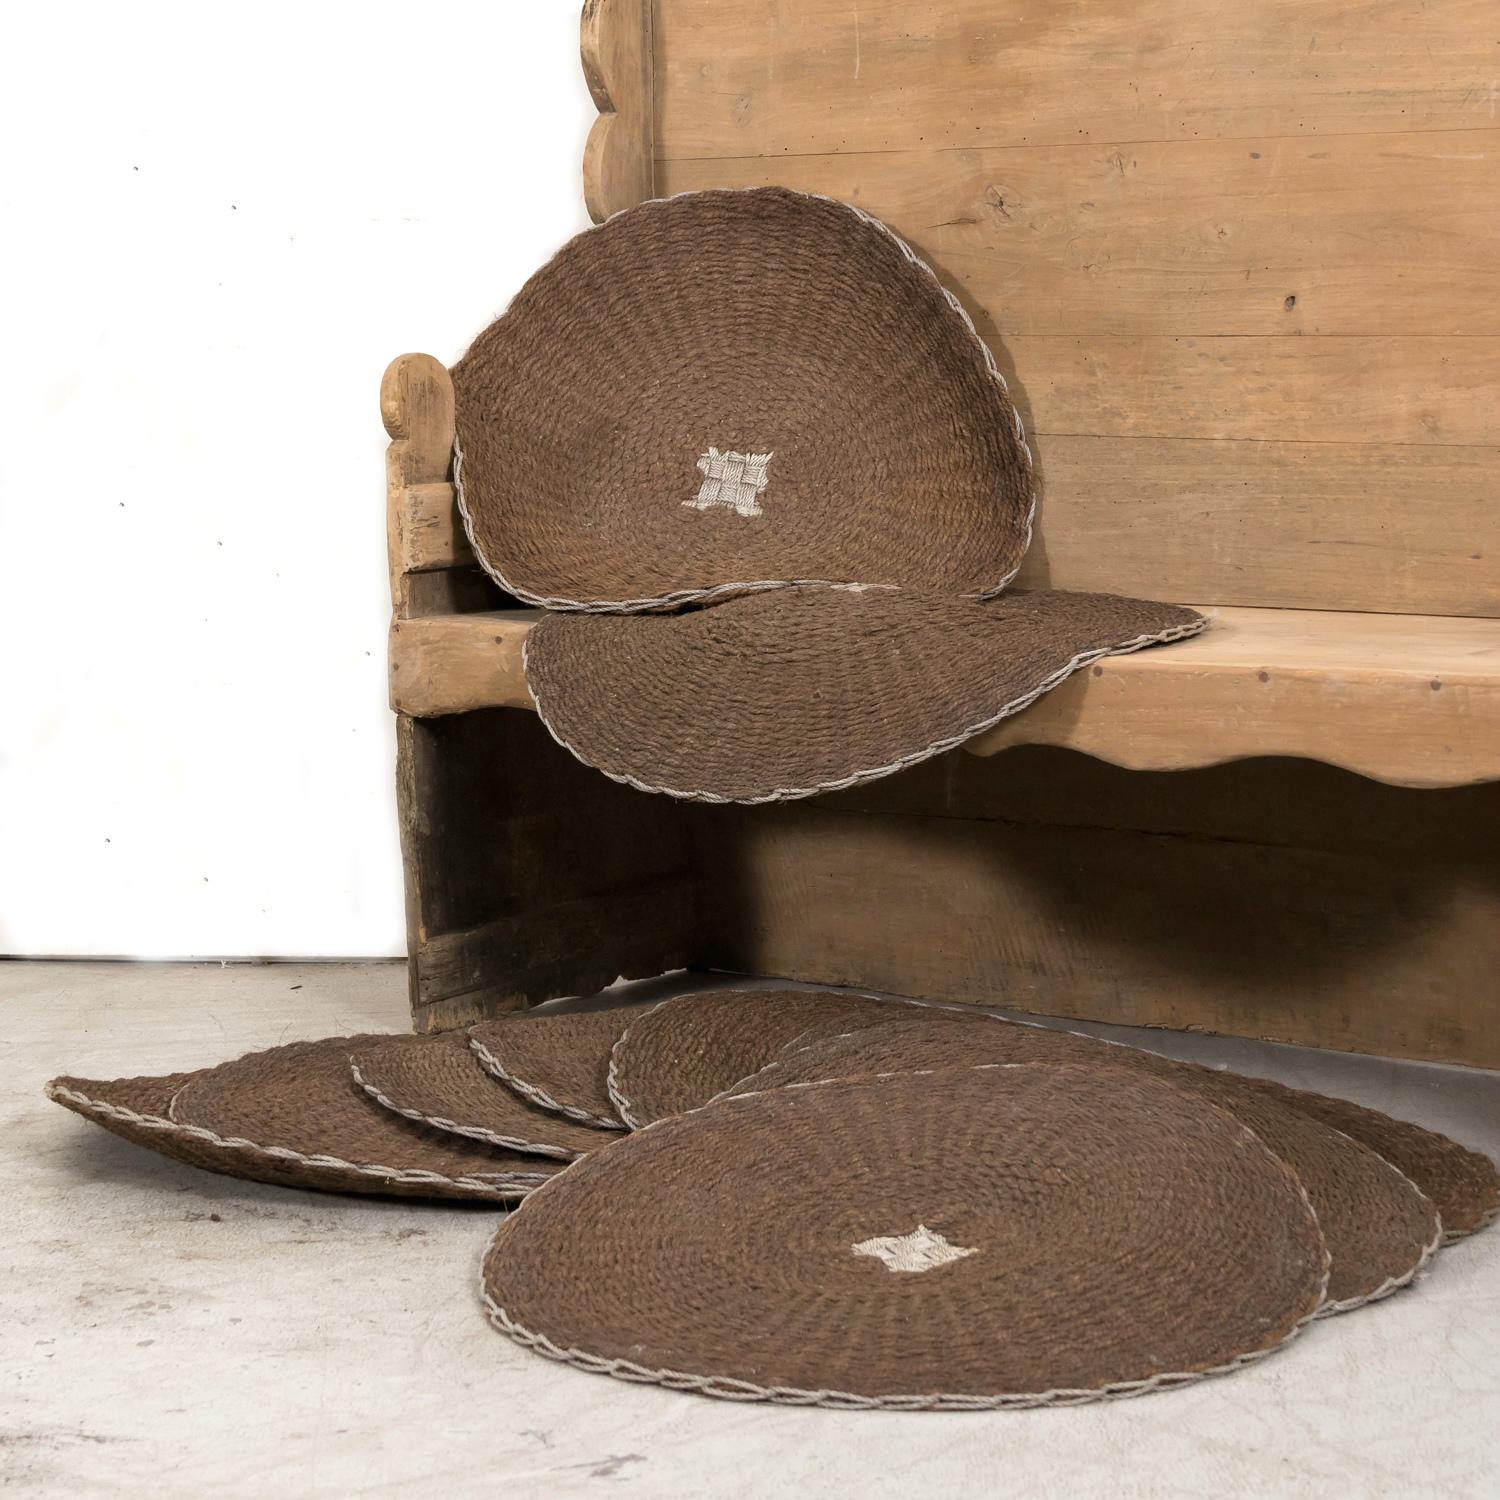 Early 20th century antique French scourtins, circa 1900 to 1930s. These coarse round mats, made from the fibers of coconut shells, were historically used as a filter in Provence's olive presses. Now used as decorative floor mats or wall hangings,